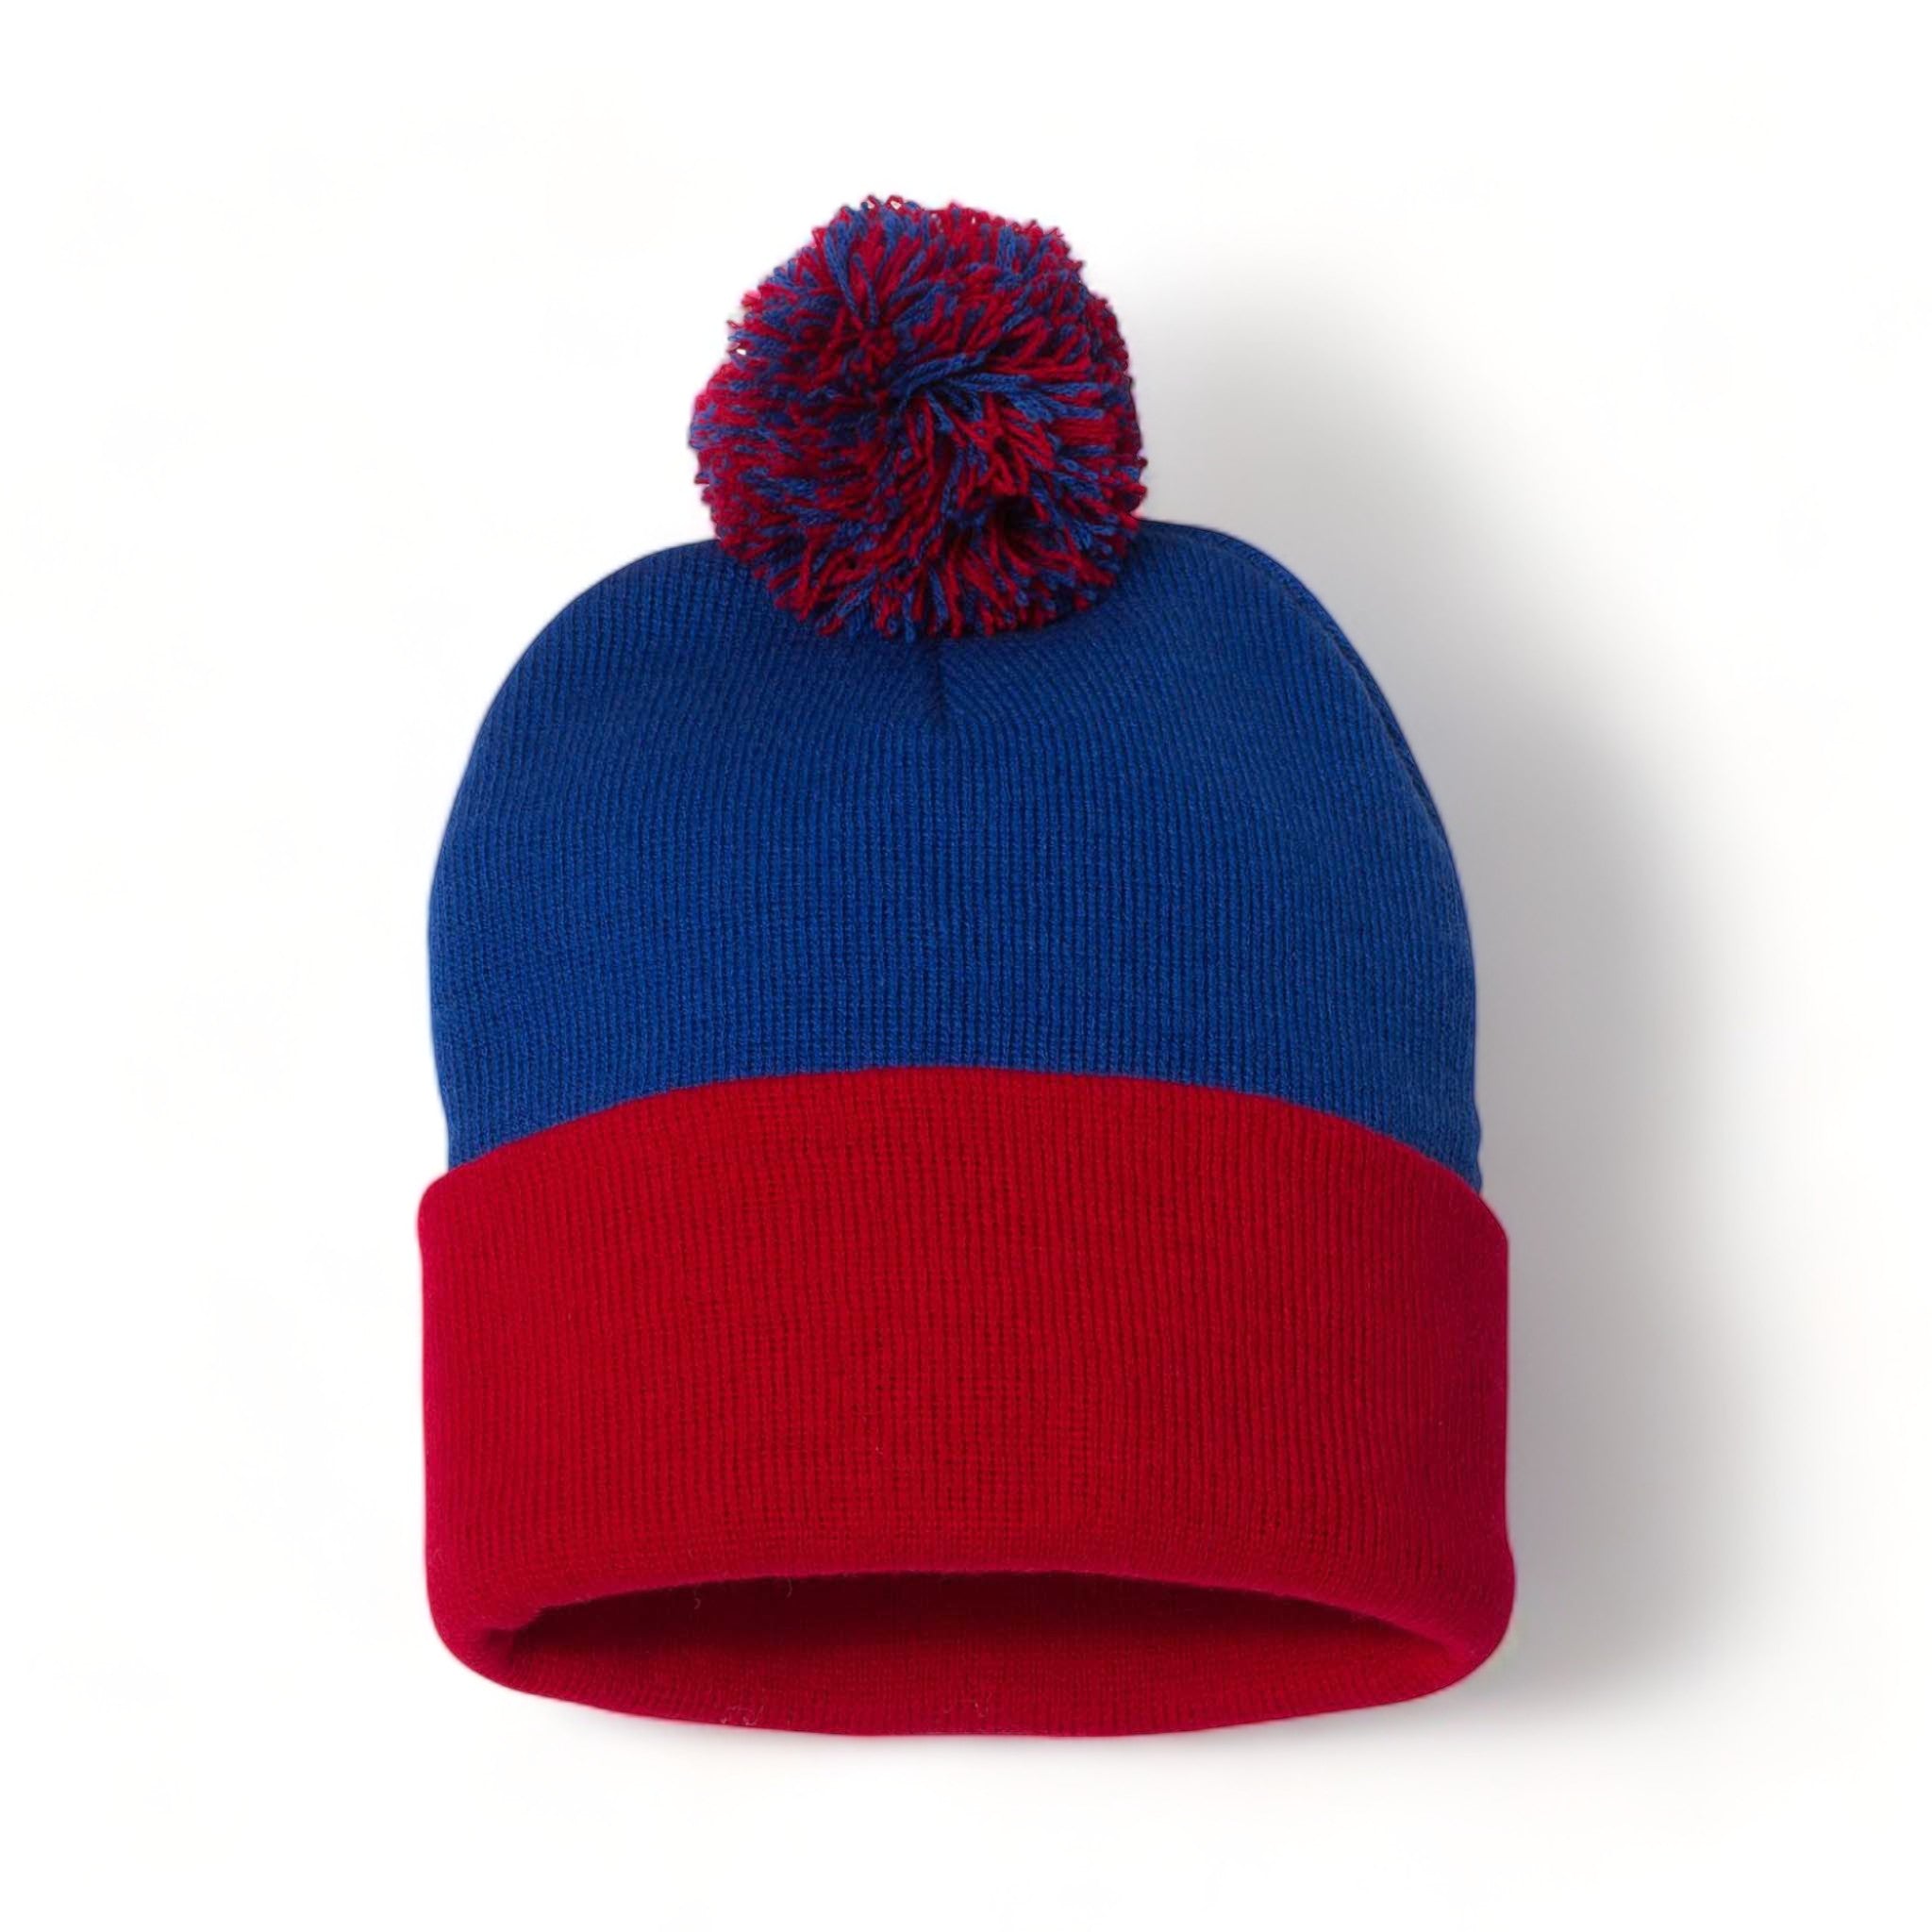 Sportsman SP15 custom beanie in royal and red